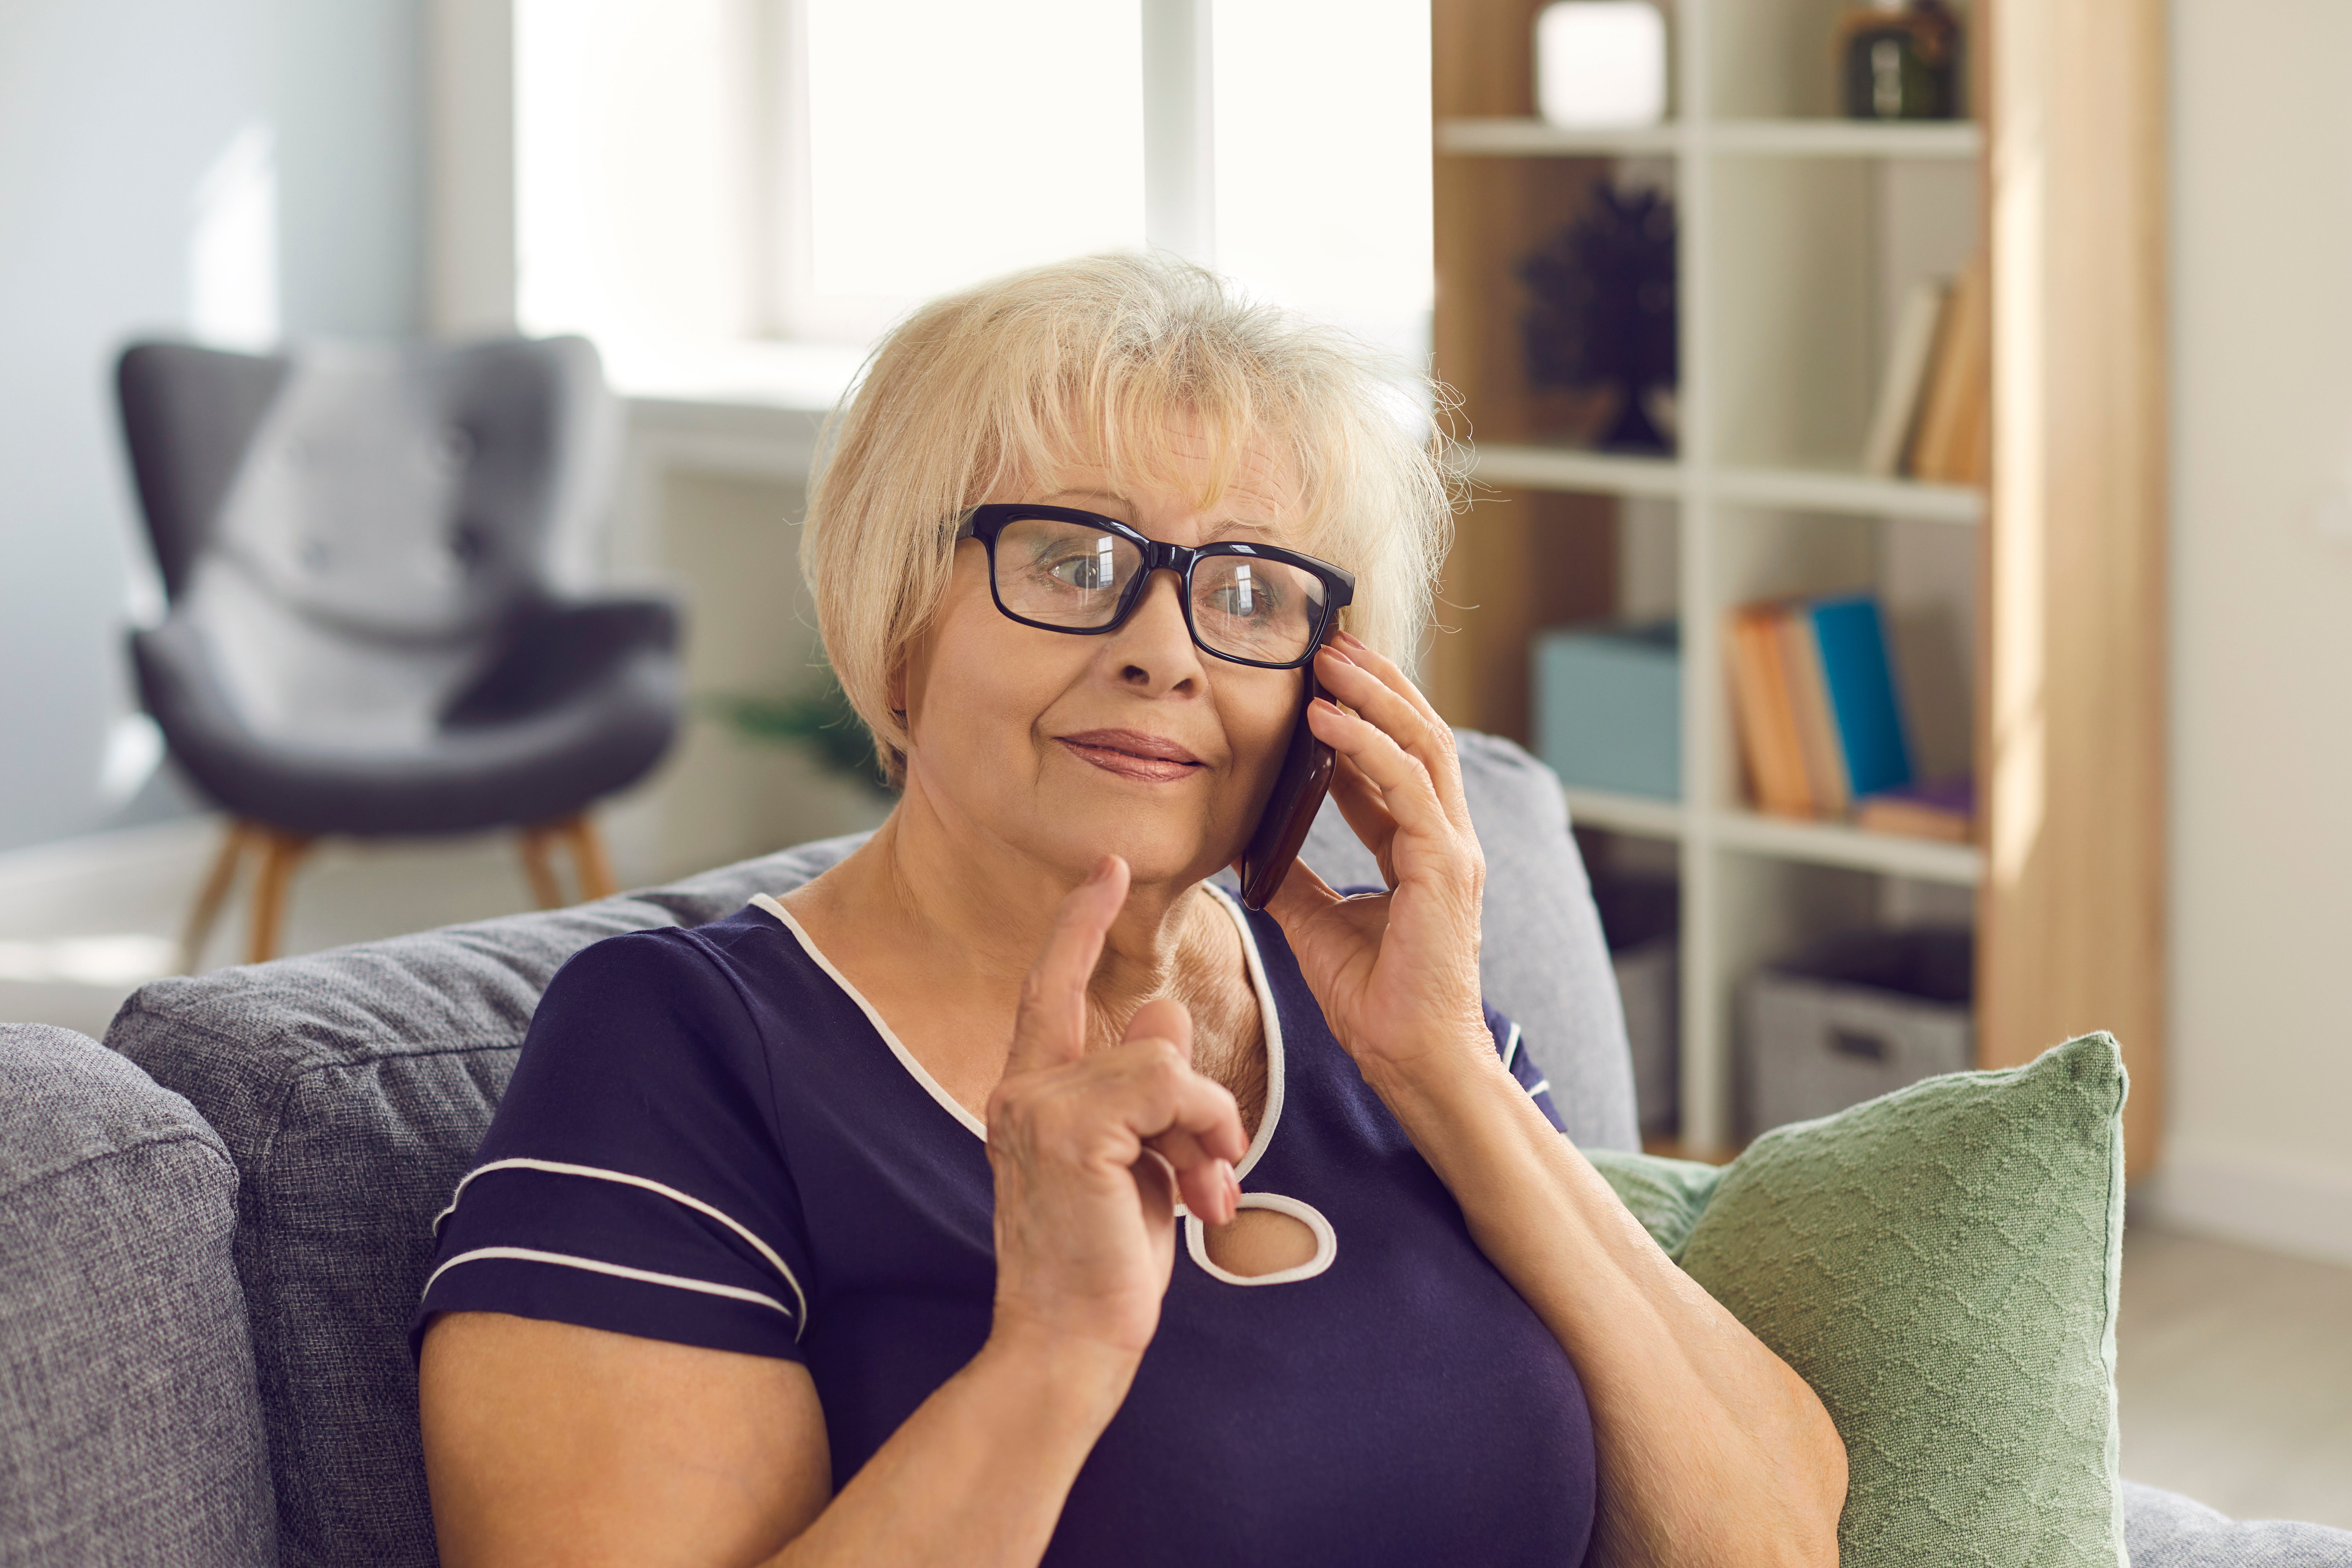 An older woman wearing glasses while sitting on a couch and speaking on a phone | Source: Shutterstock